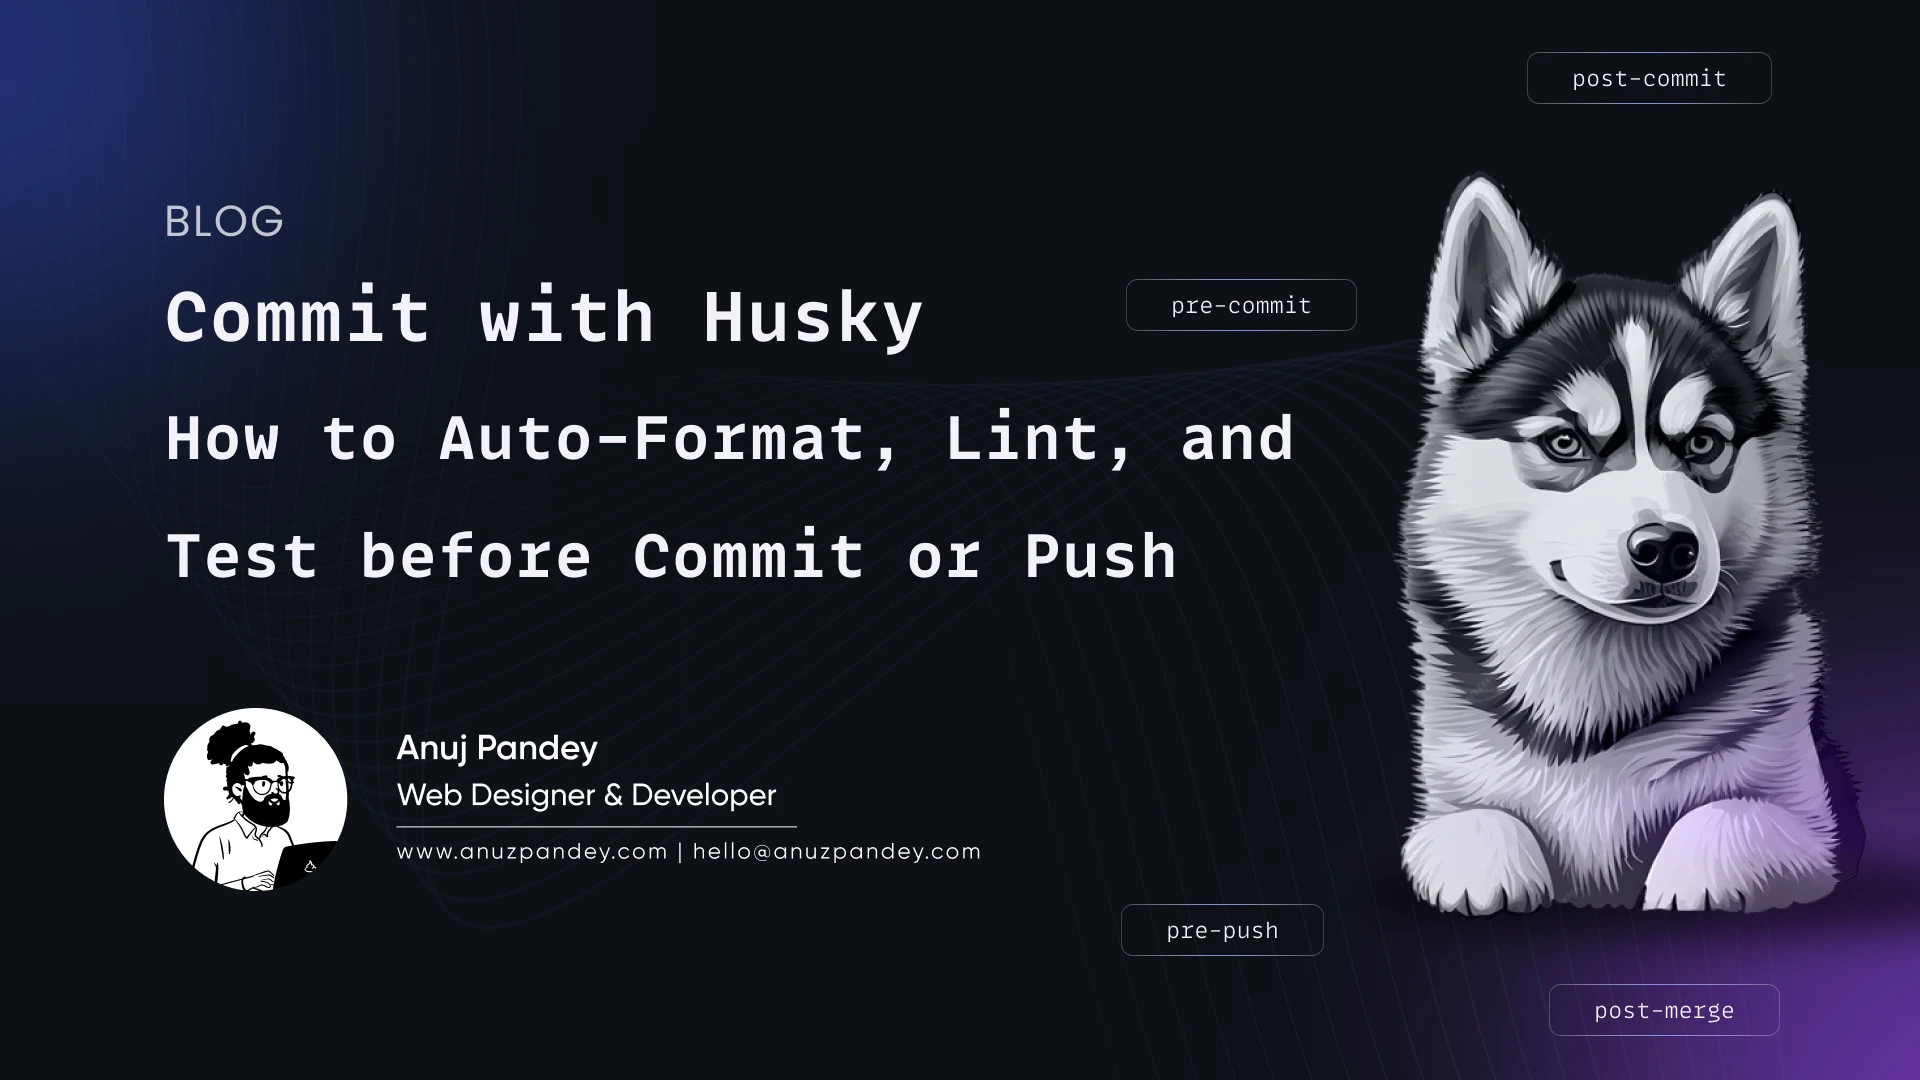 Commit with Husky: How to Auto-Format, Lint, and Test before Commit or Push